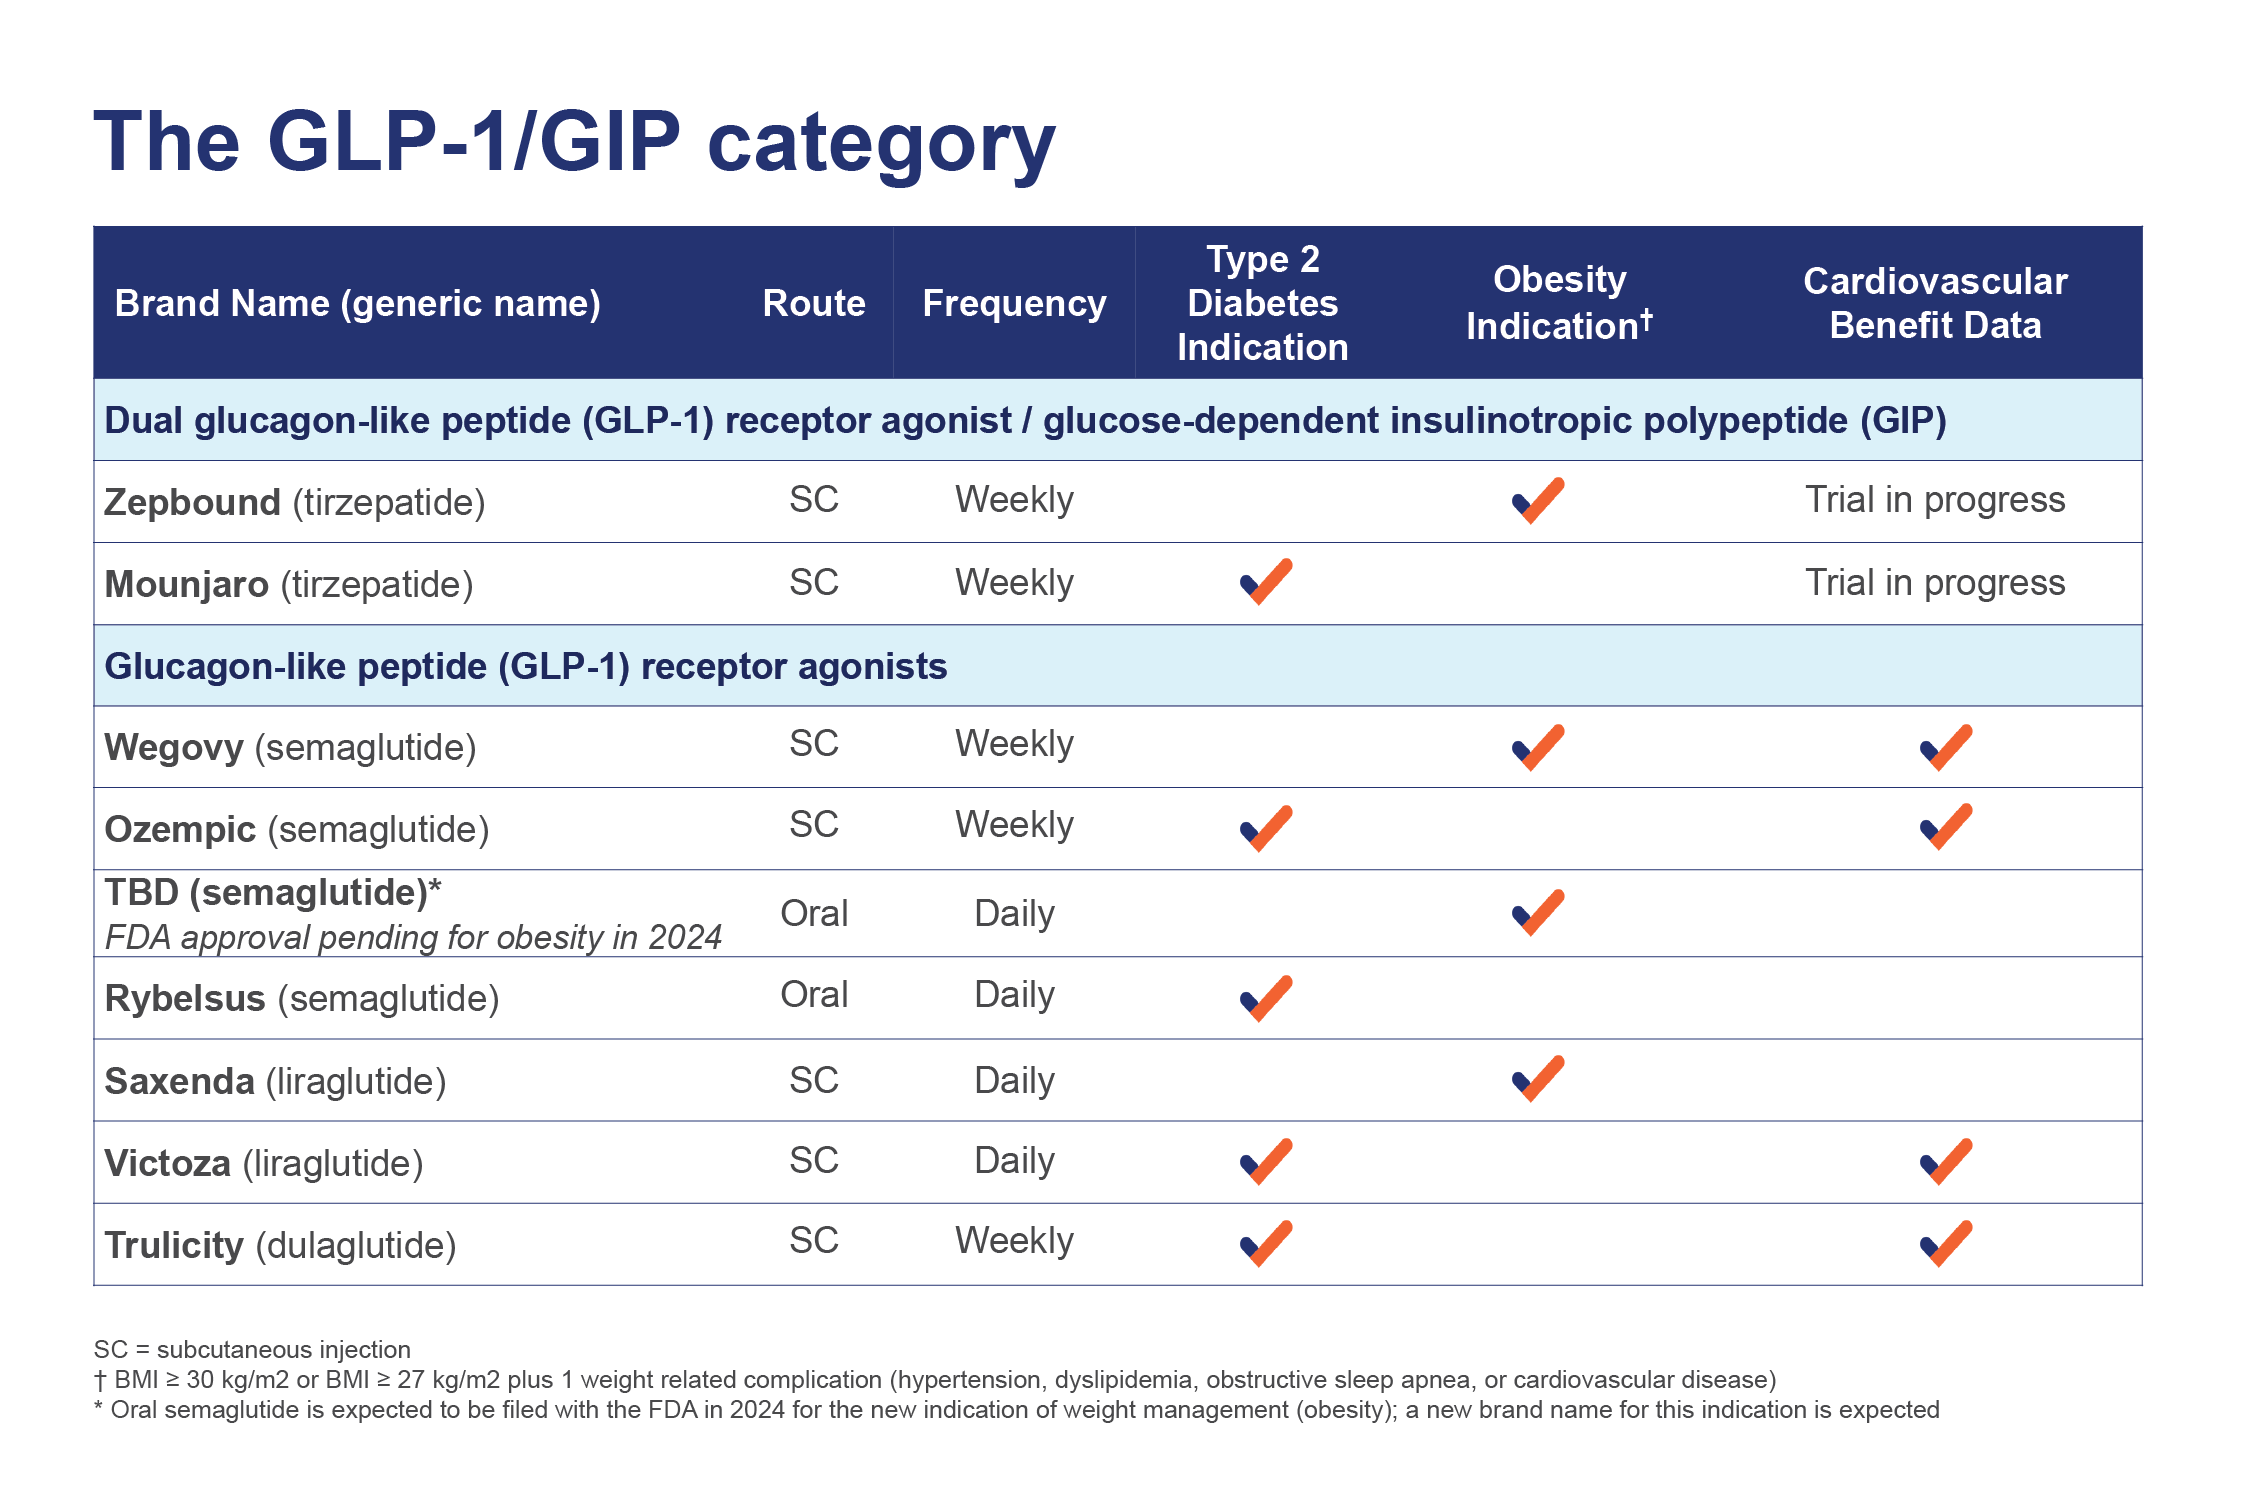 GLP-1 and GIP drug class including route of administration, frequency and indications.